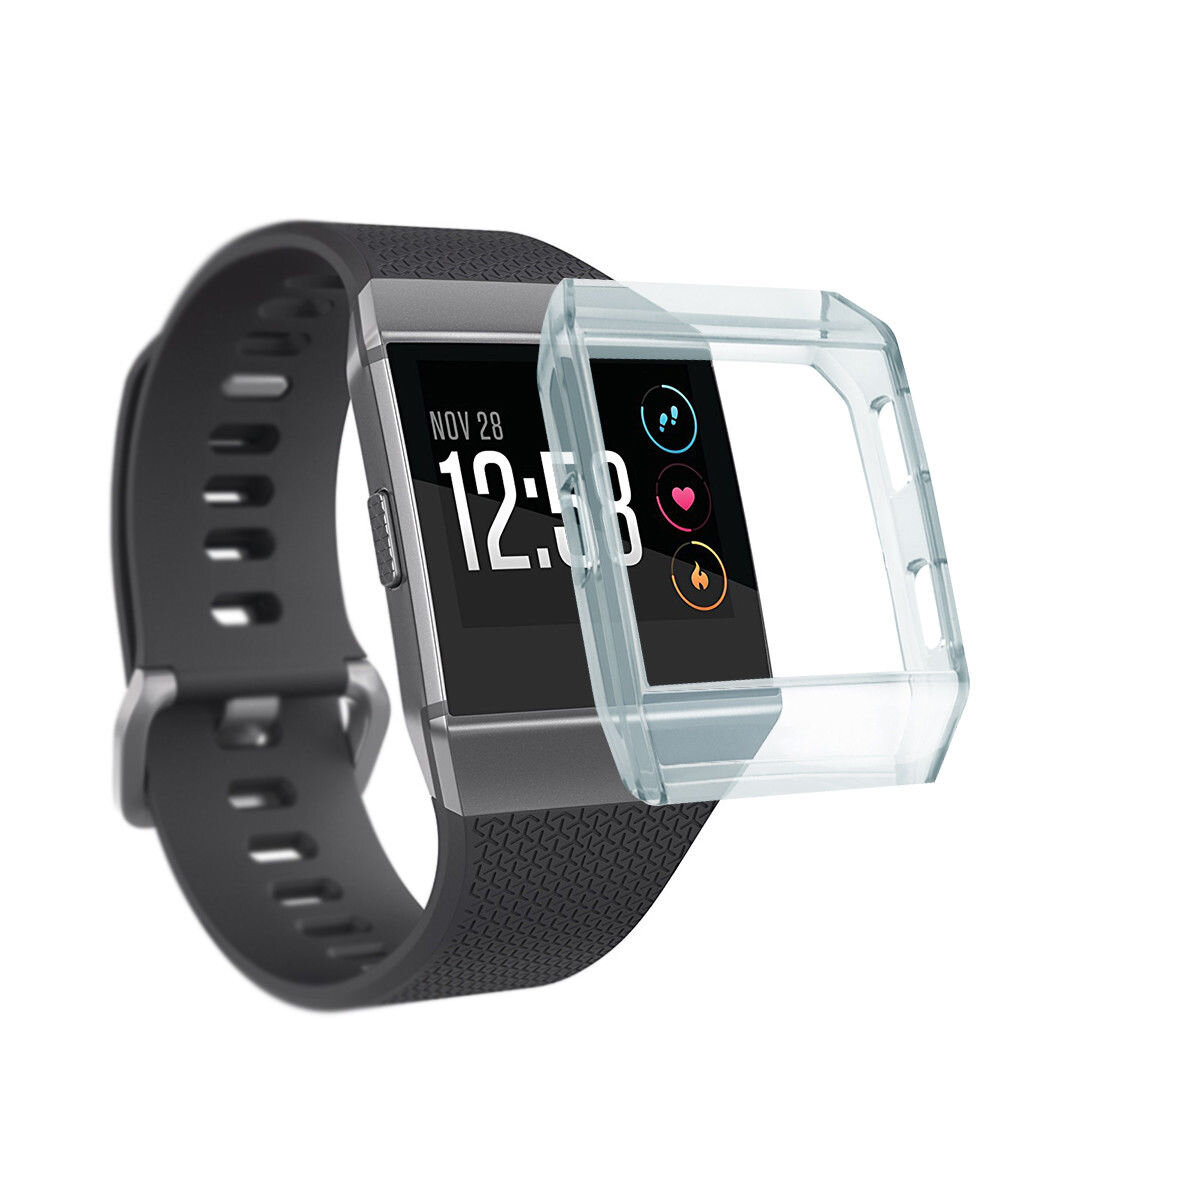 Silicone Case Cover Beschermende Shell voor Fitbit Ionic Smart Band